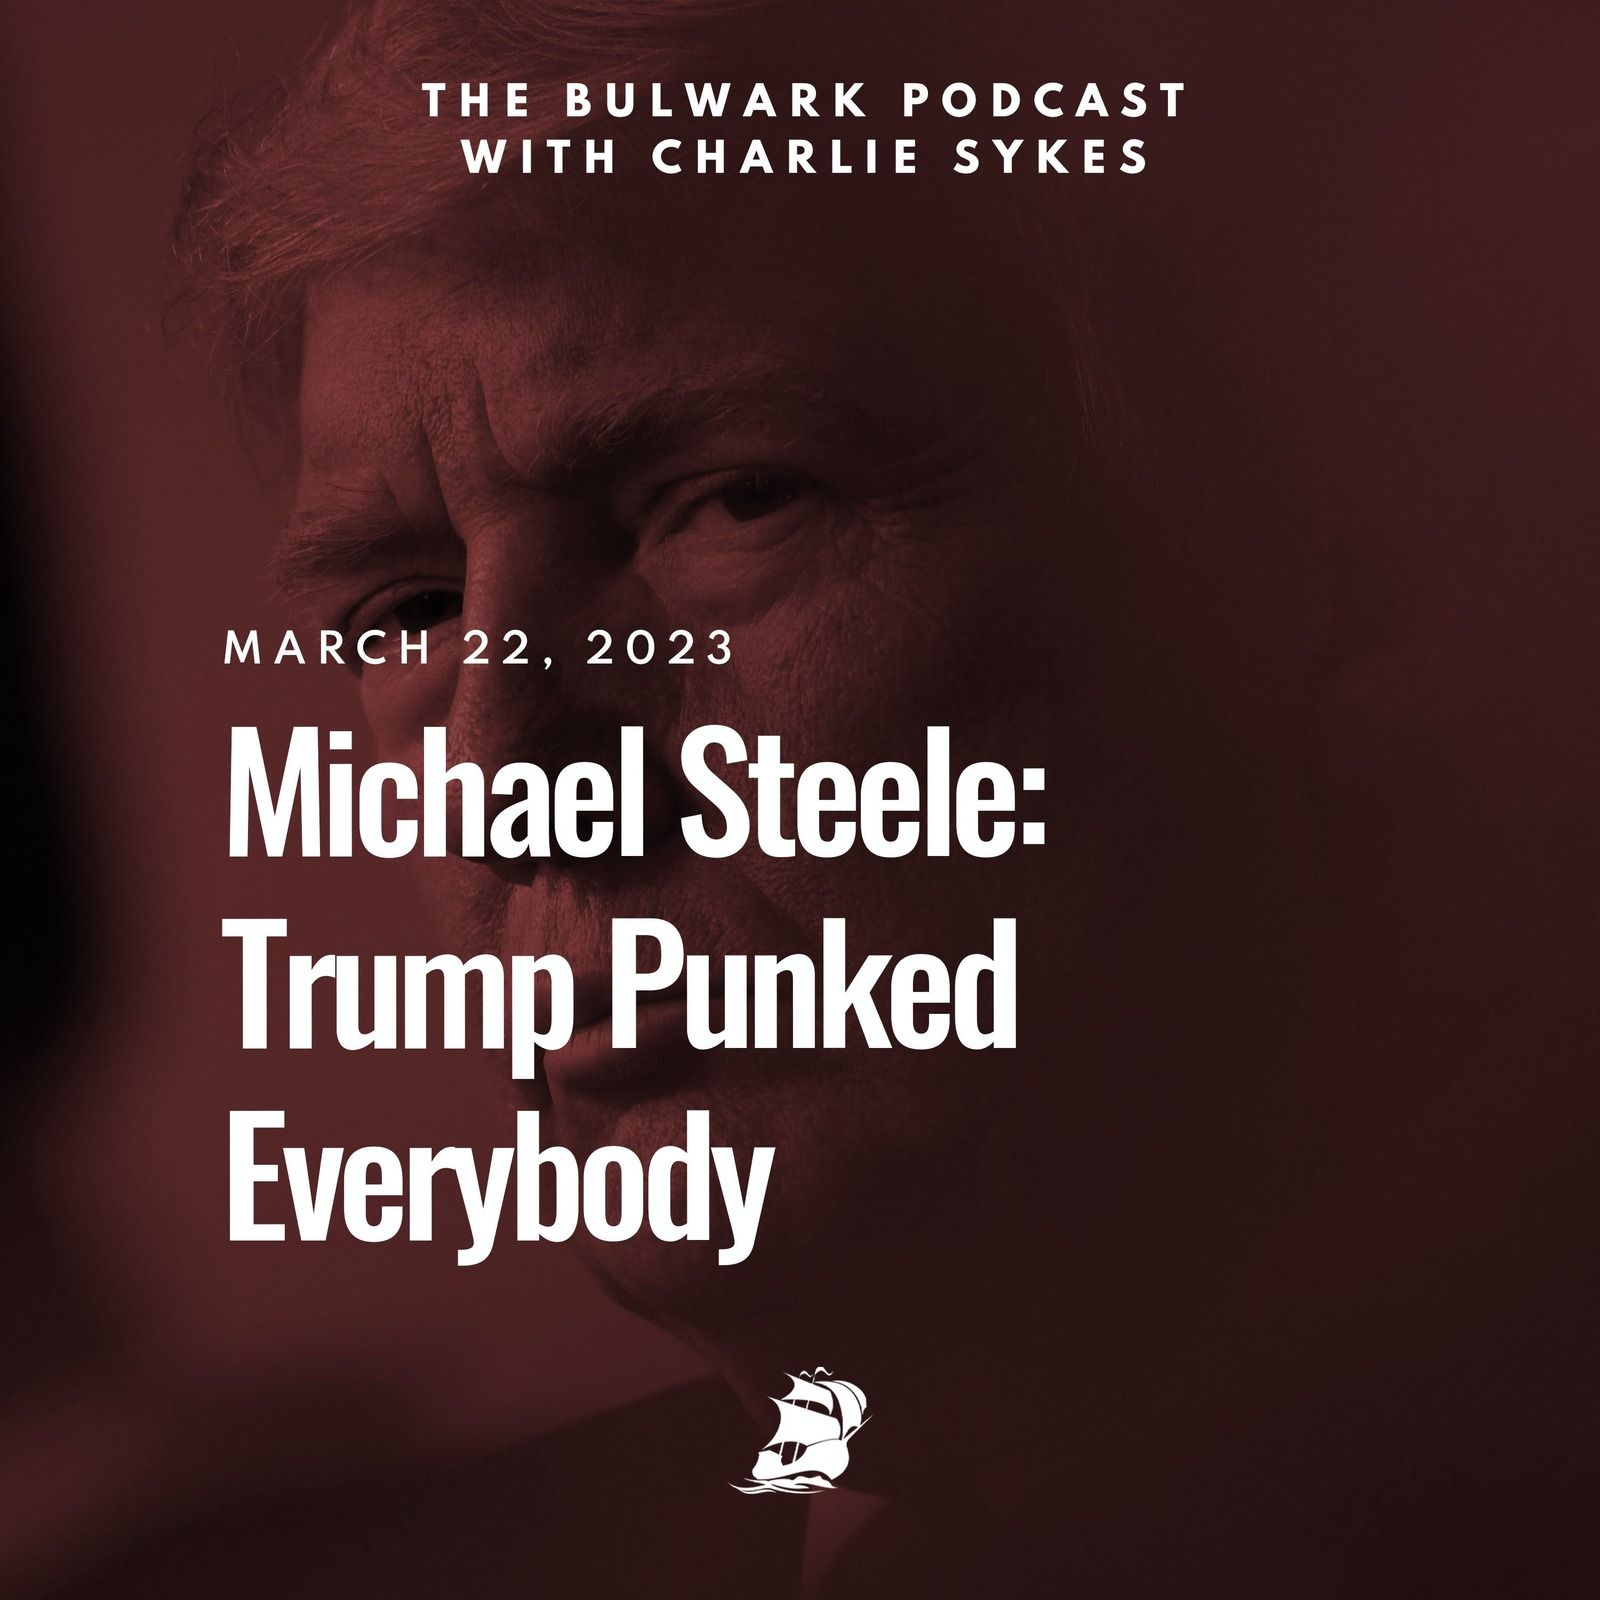 Michael Steele: Trump Punked Everybody  by The Bulwark Podcast